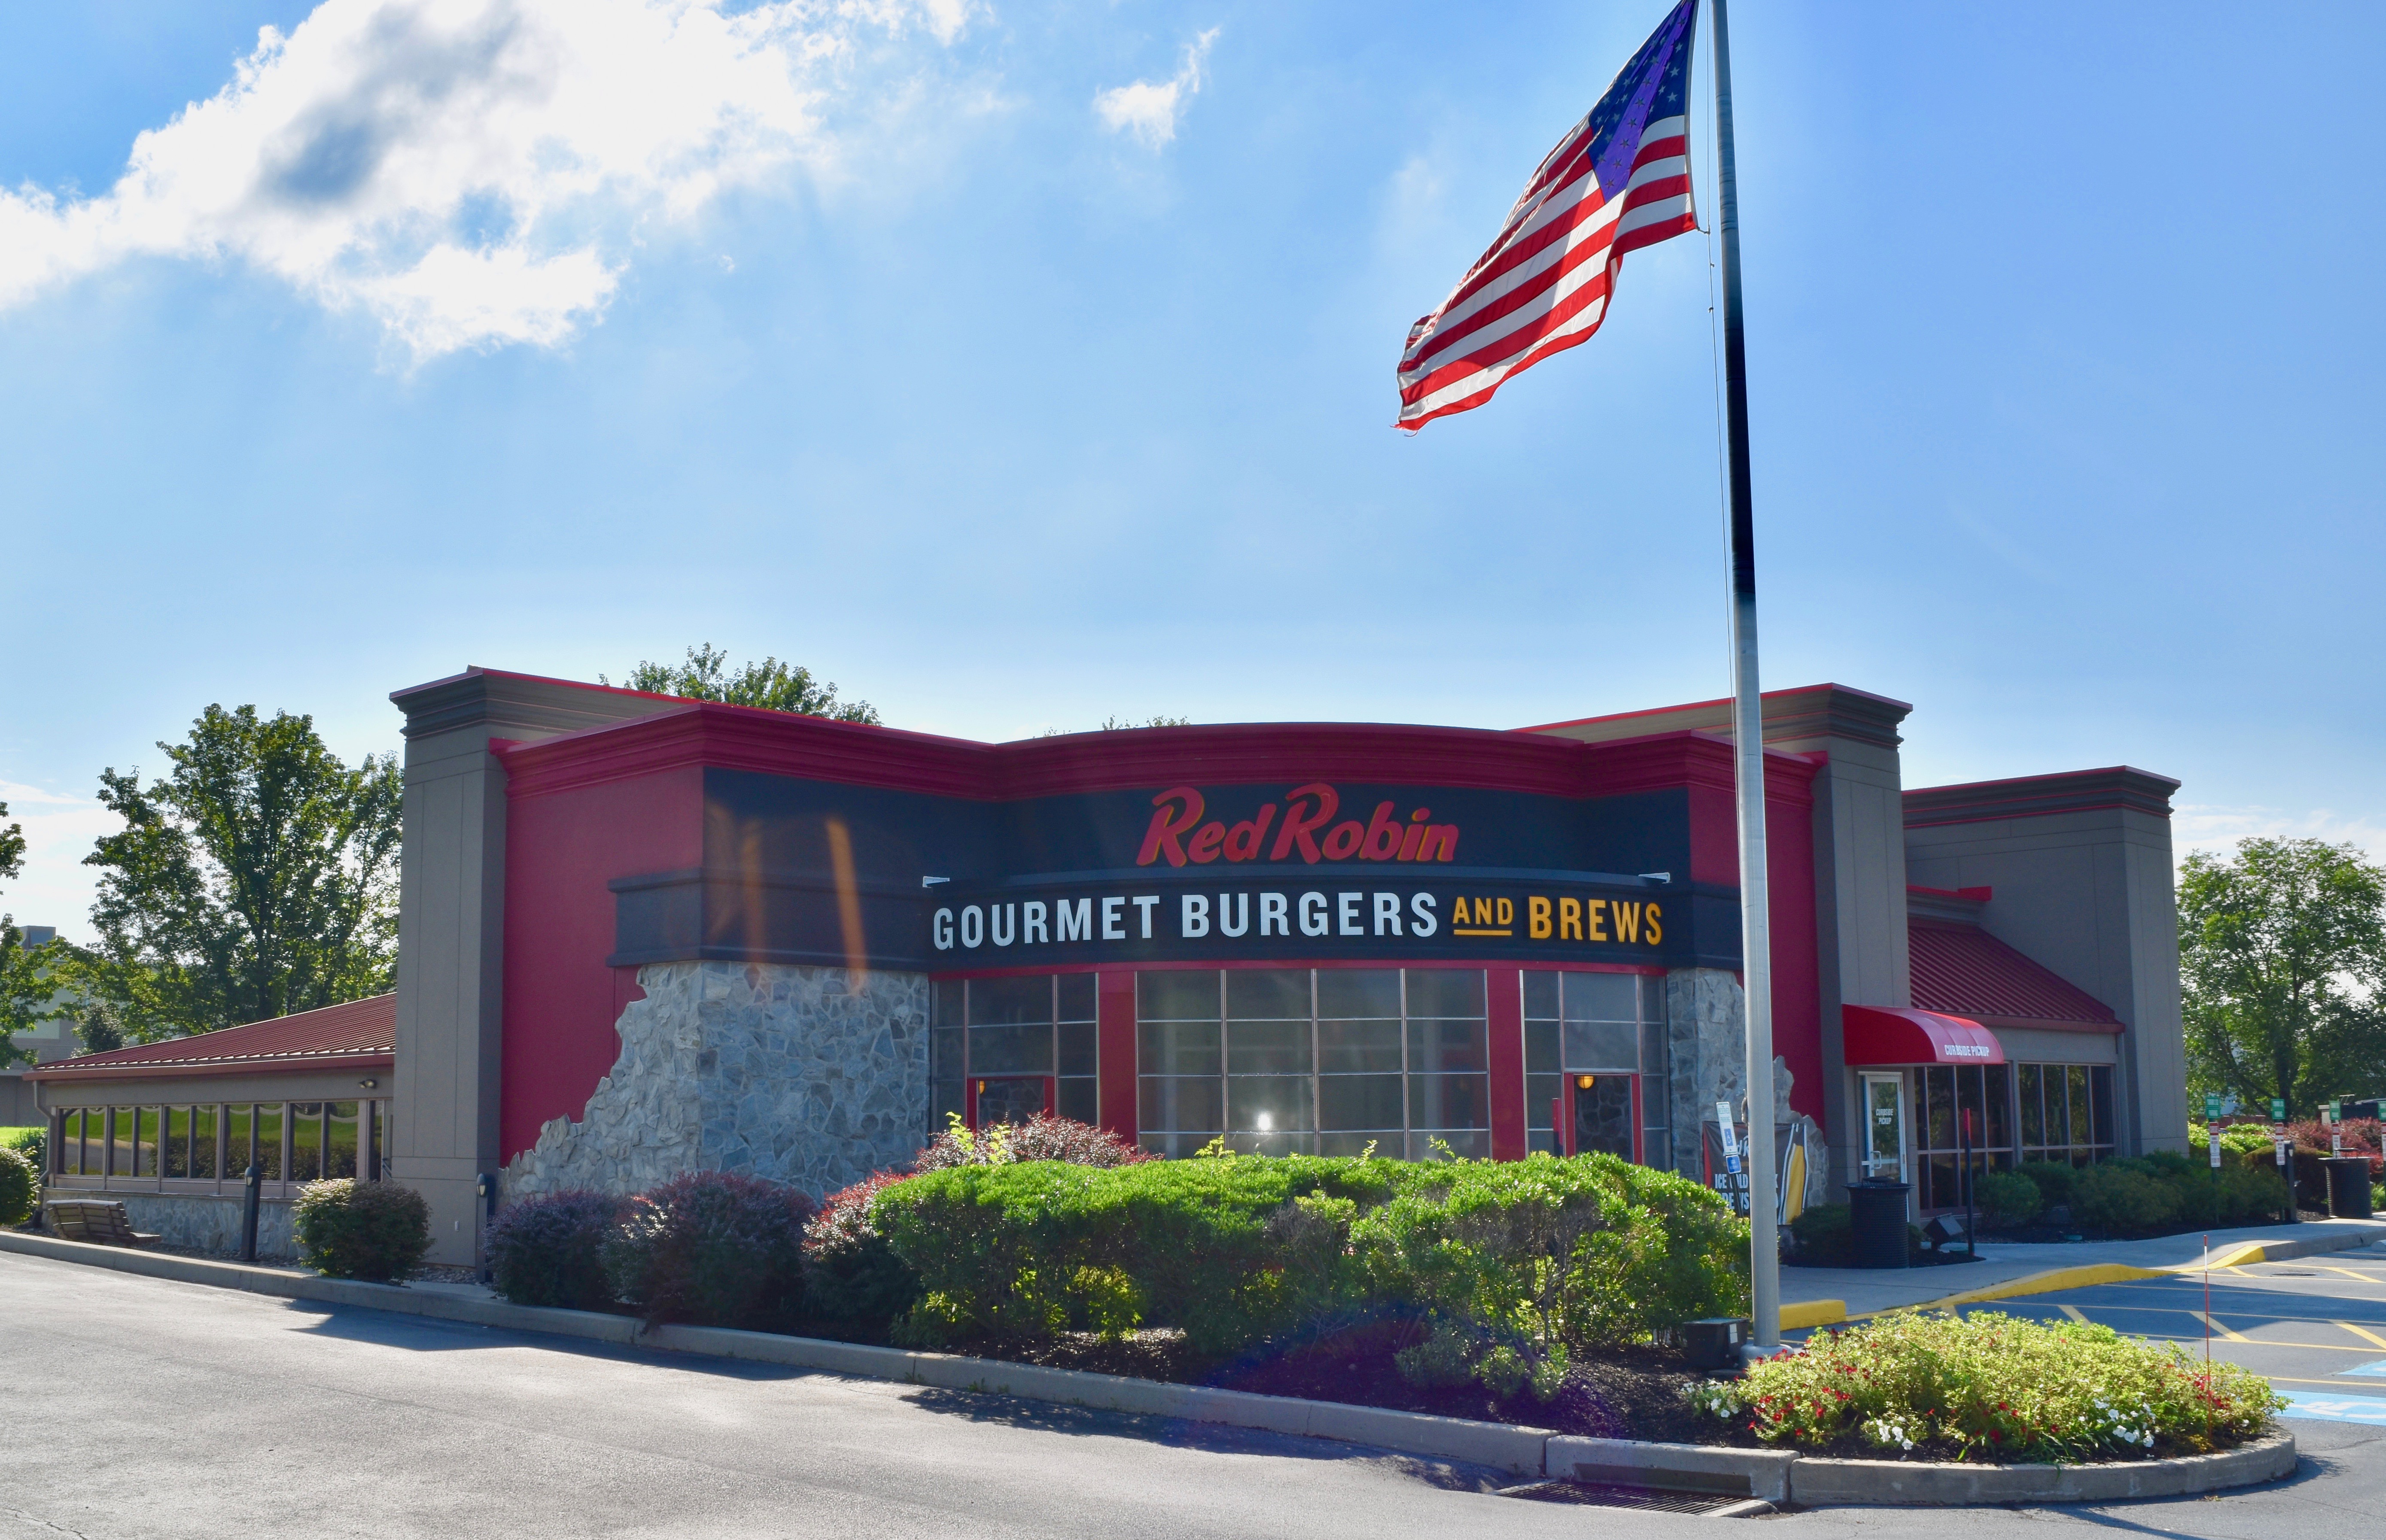 Image of exterior front entrance to the Hershey, PA Red Robin